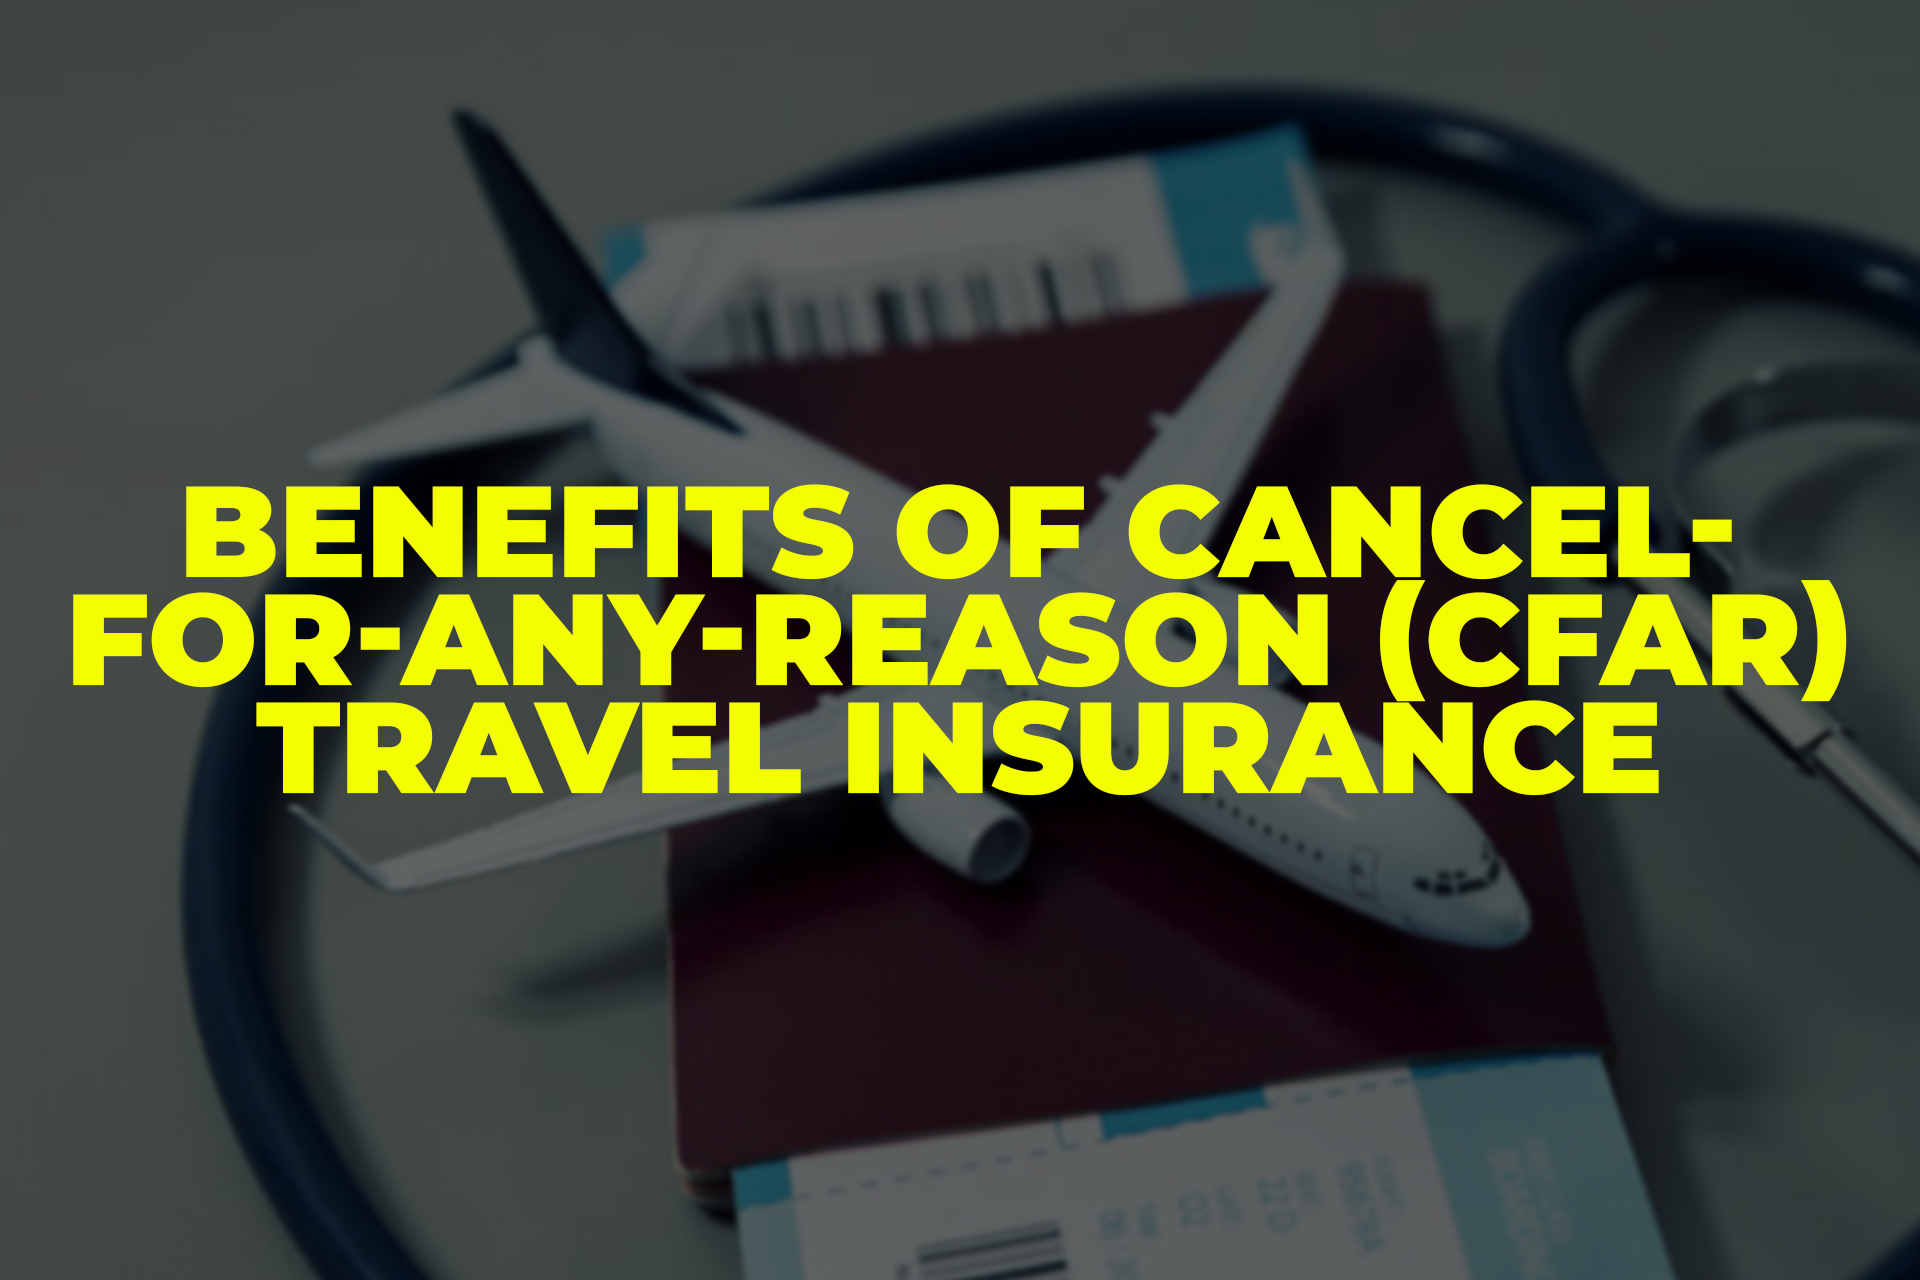 Benefits of Cancel-for-Any-Reason (CFAR) Travel Insurance